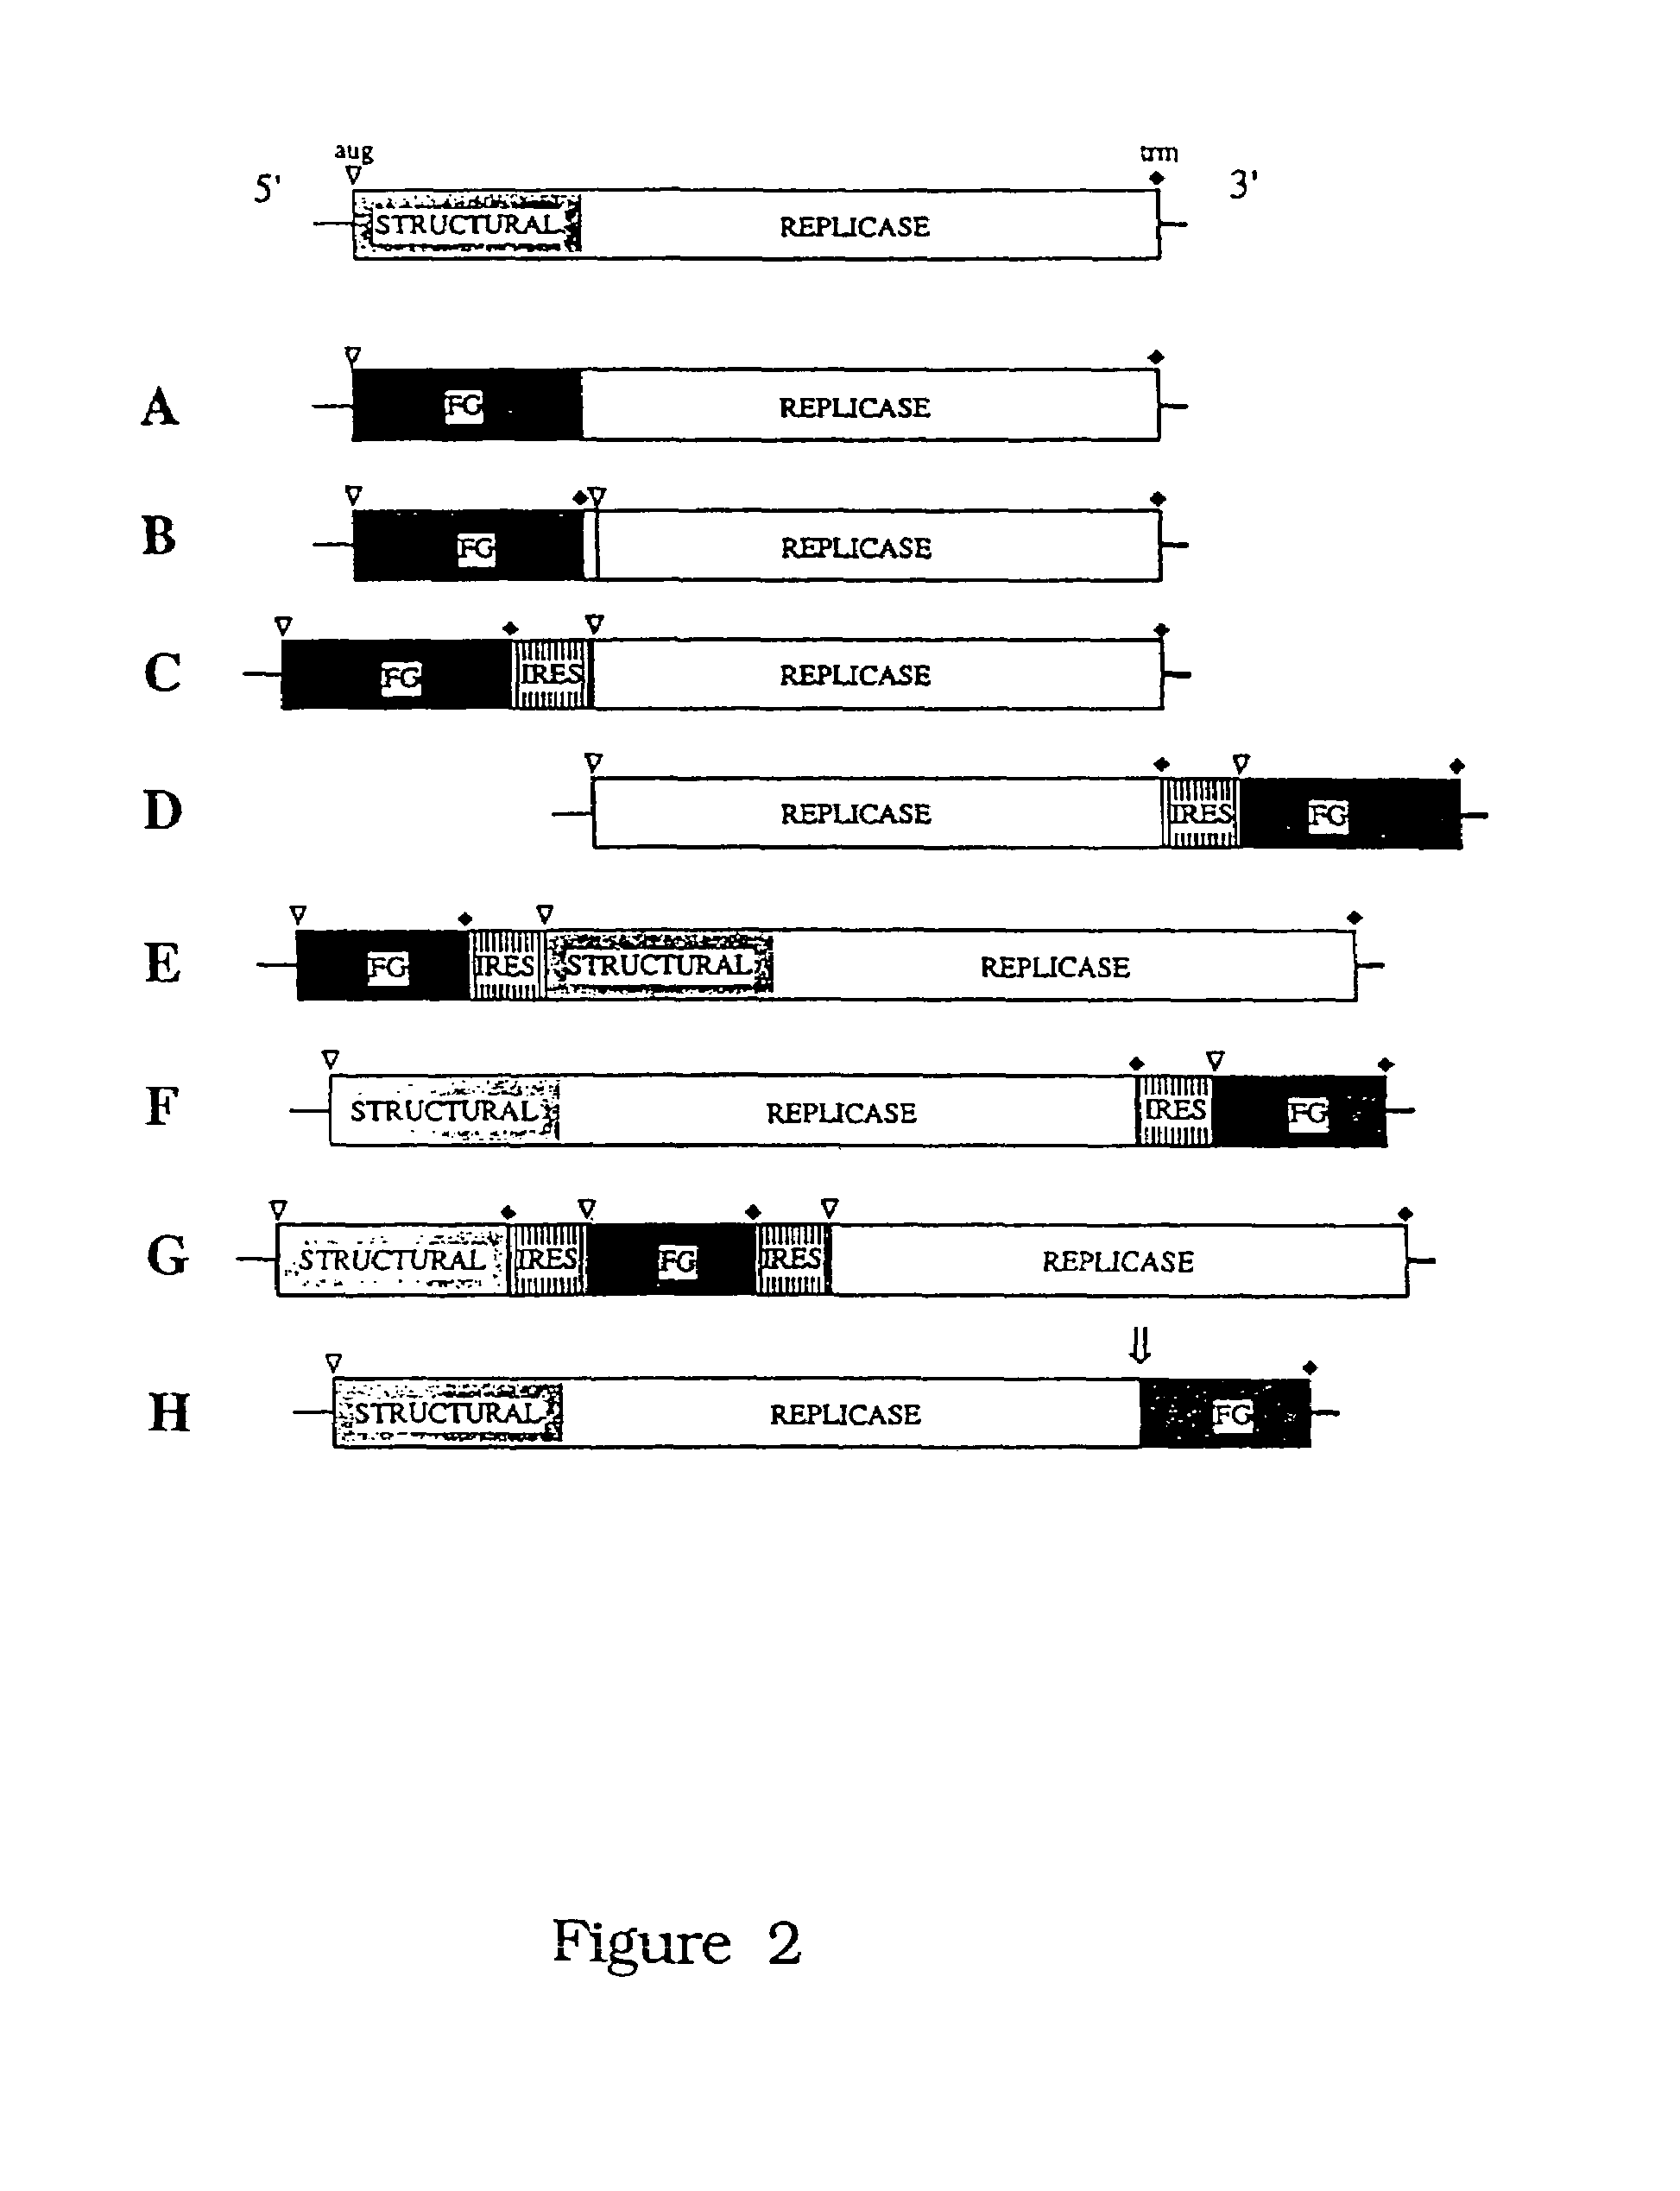 Functional DNA clone for hepatitis C virus (HCV) and uses thereof